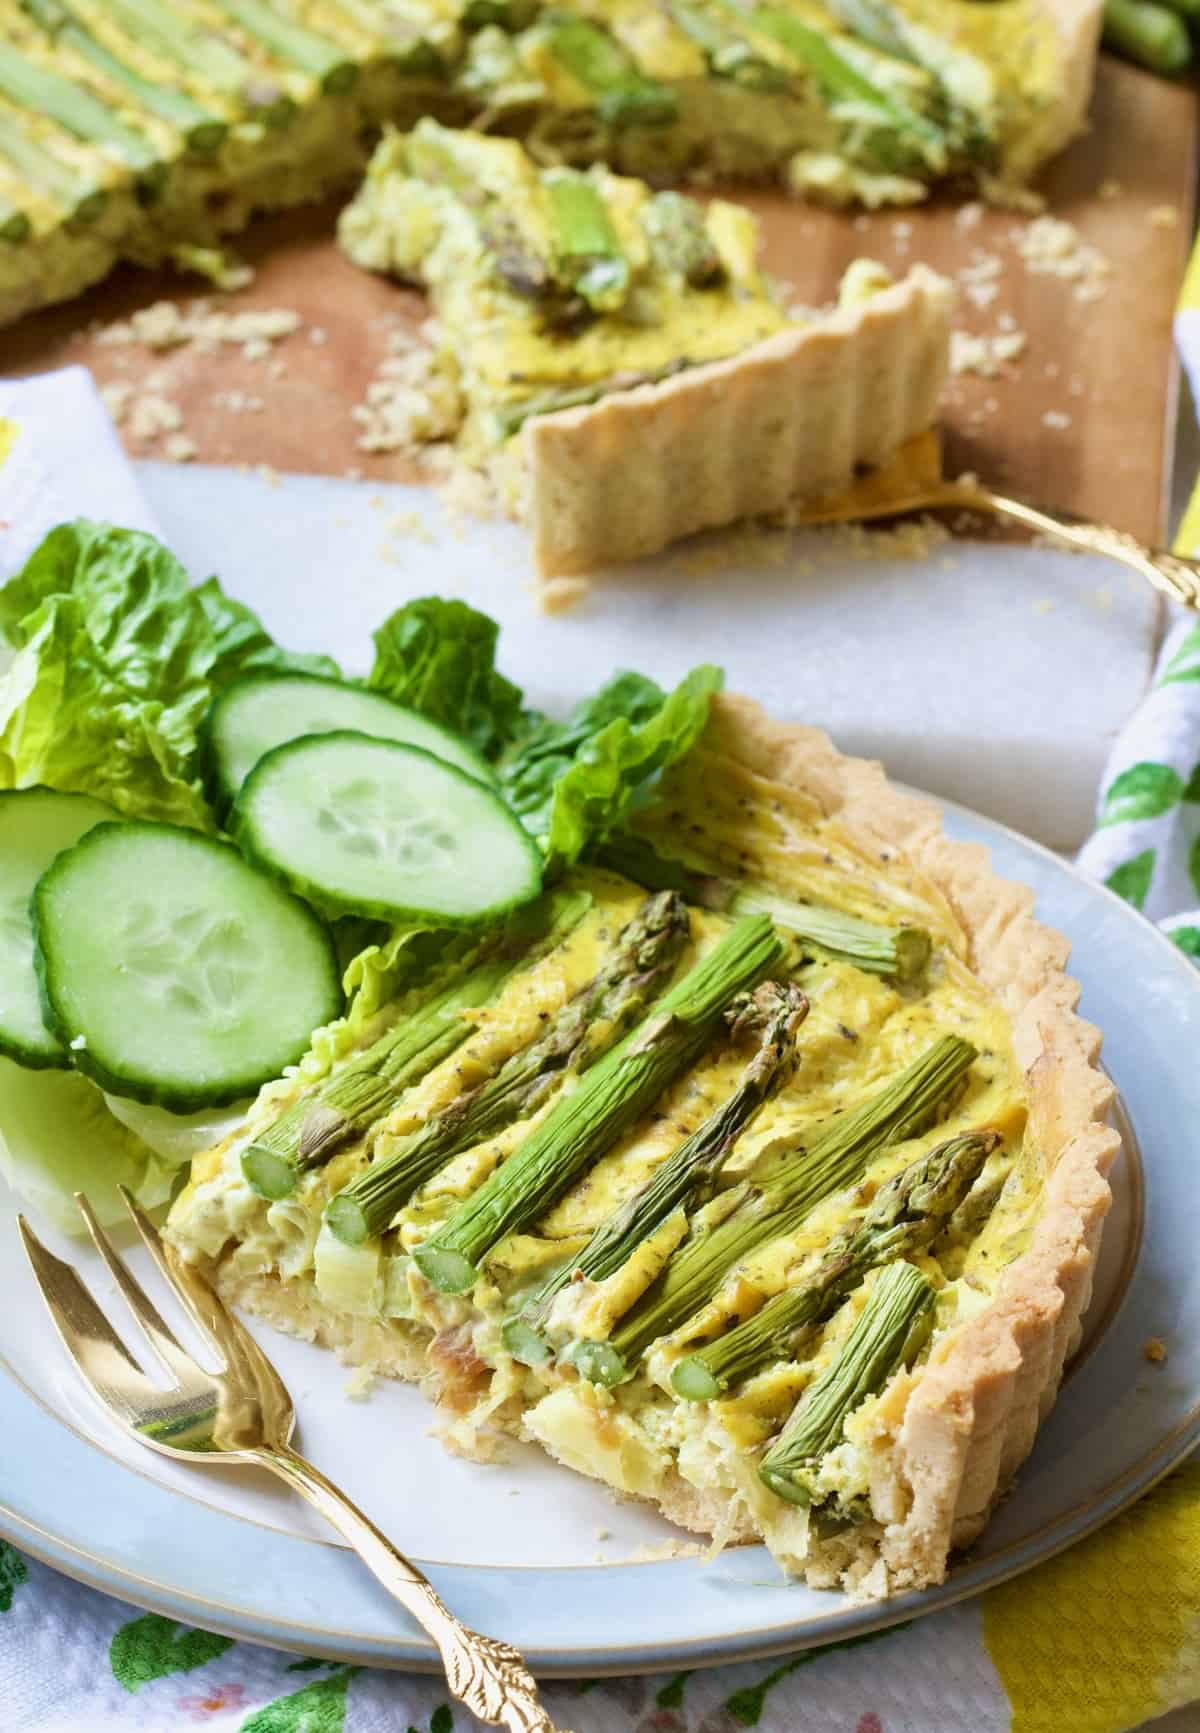 Slice of vegan quiche on a plate with garnish.